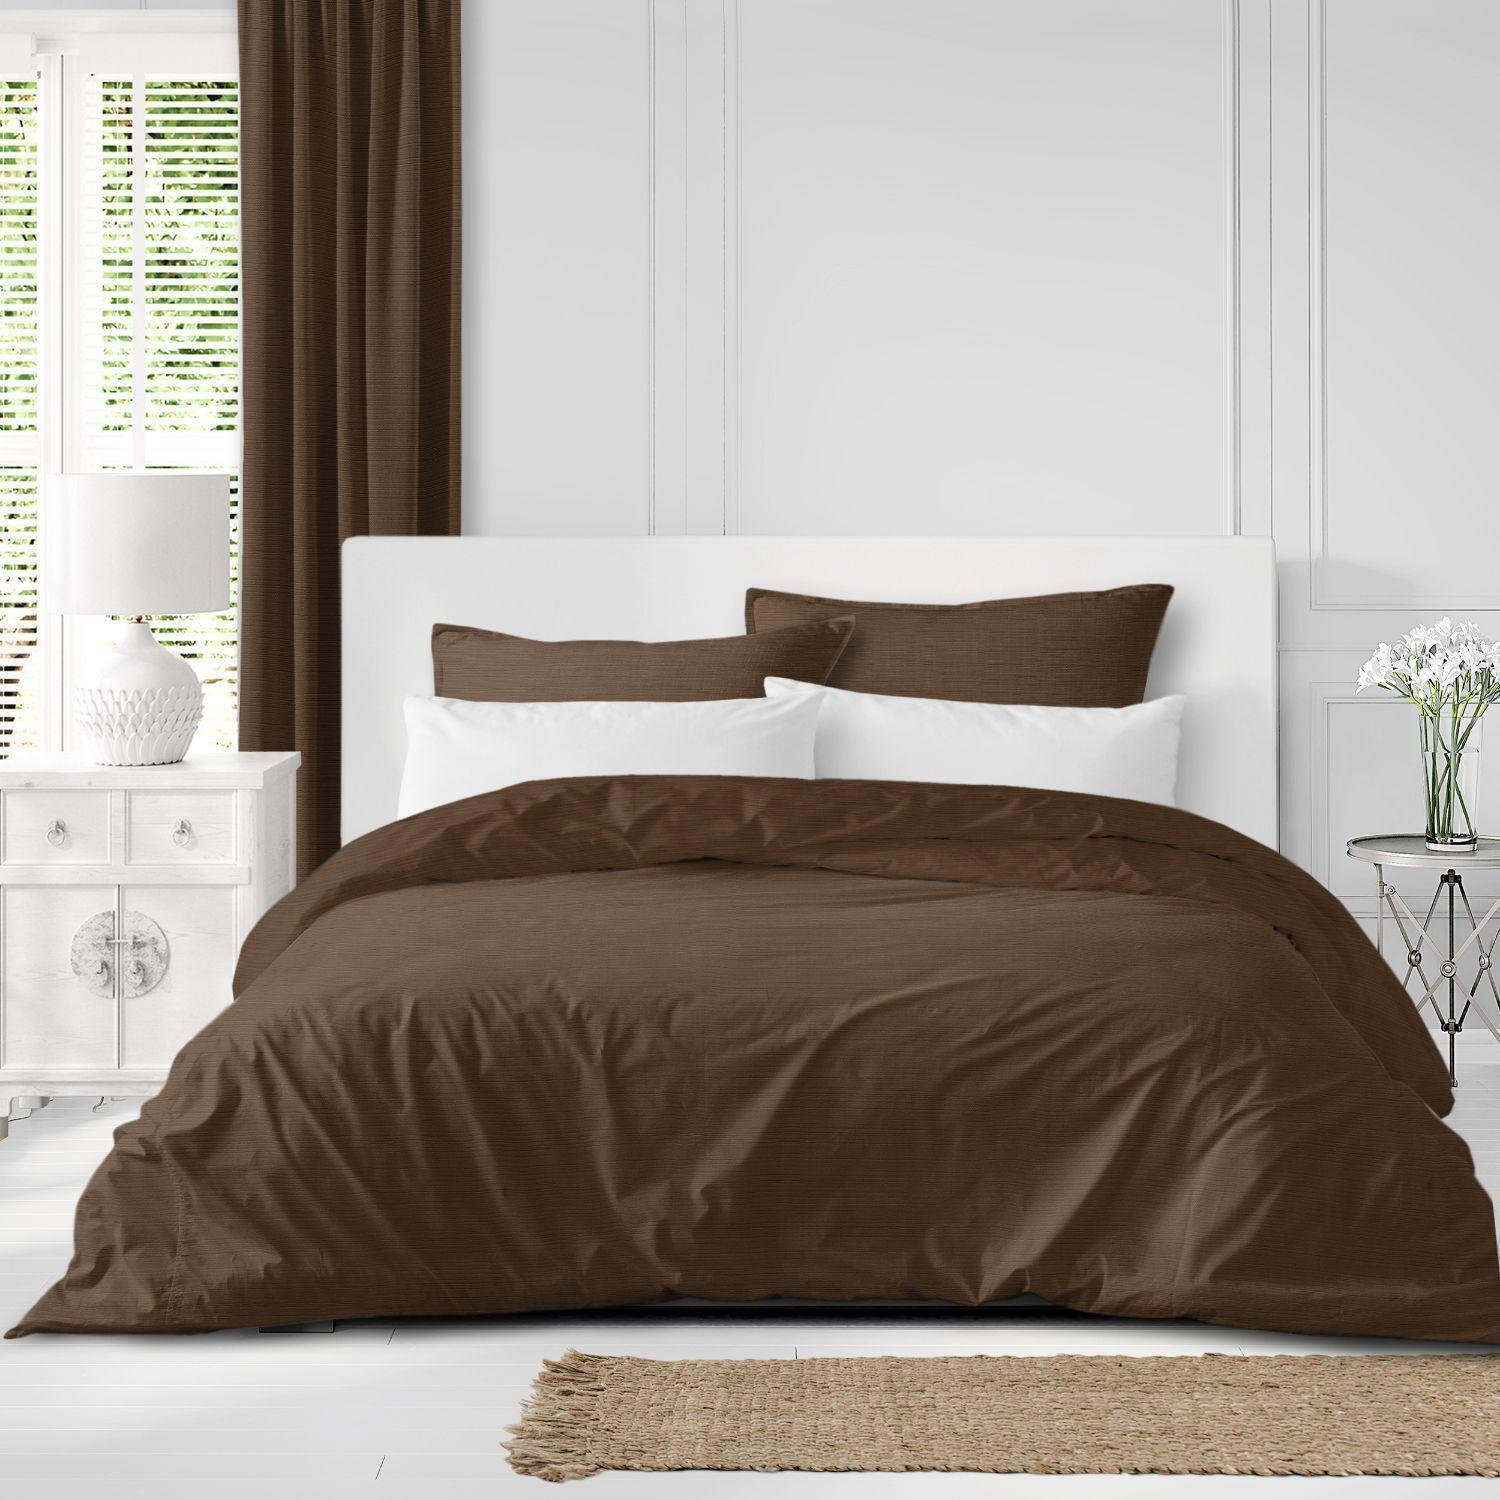 Set of 3 Walnut Brown Solid Comforter with Pillow Shams - King Size alternate image